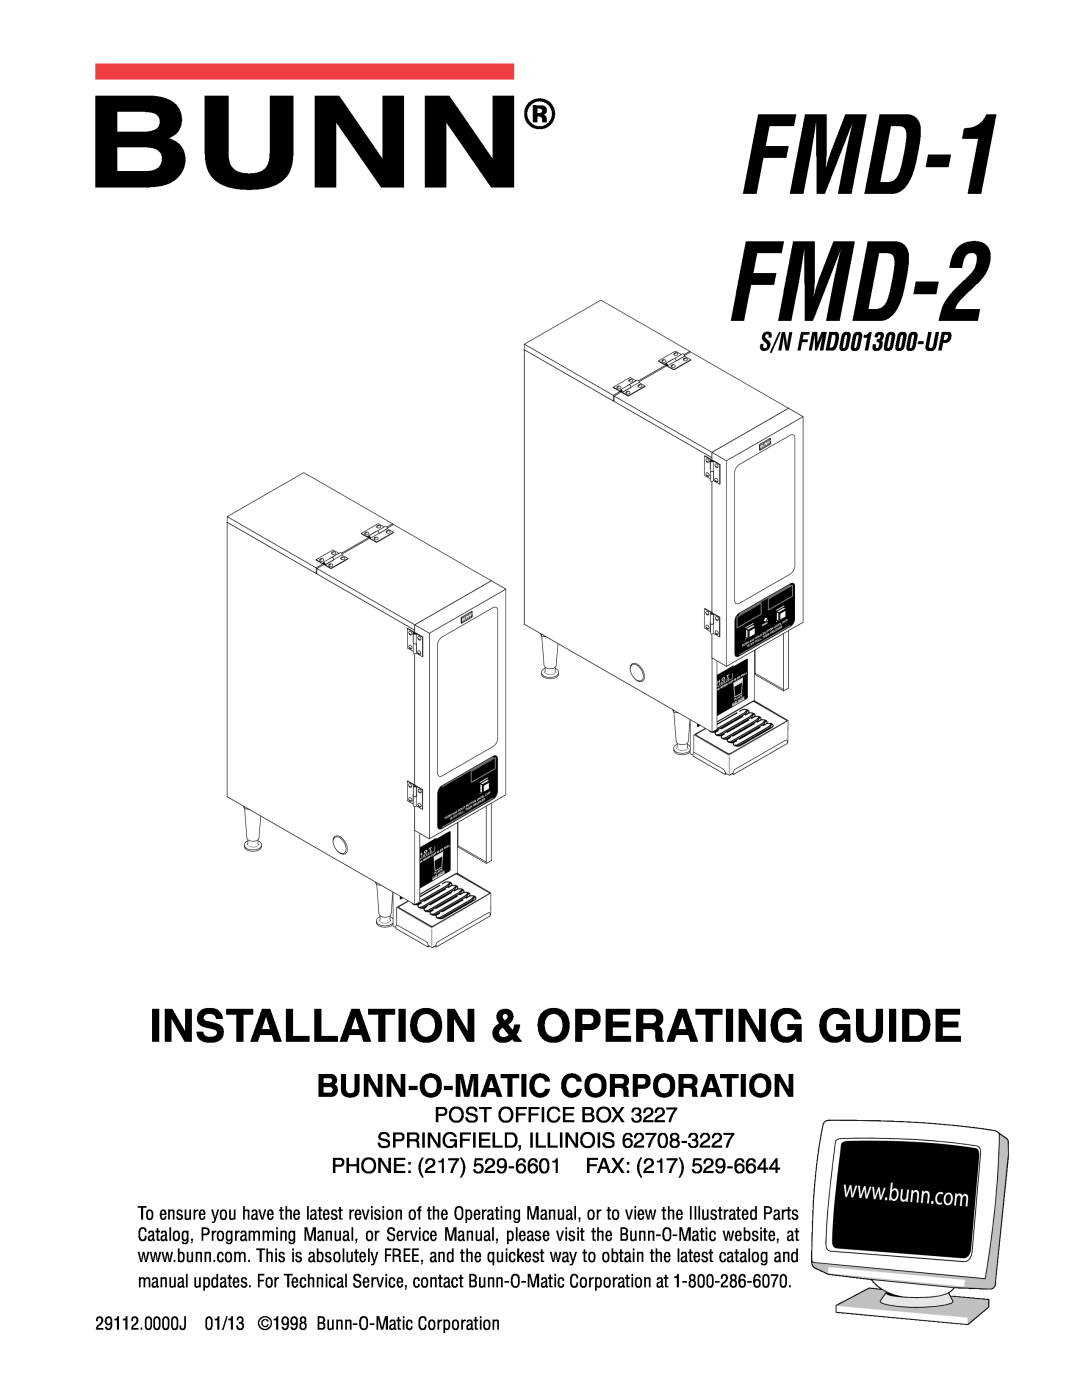 Bunn service manual FMD-1 FMD-2, Installation & Operating Guide, Bunn-O-Maticcorporation, S/N FMD0013000-UP 